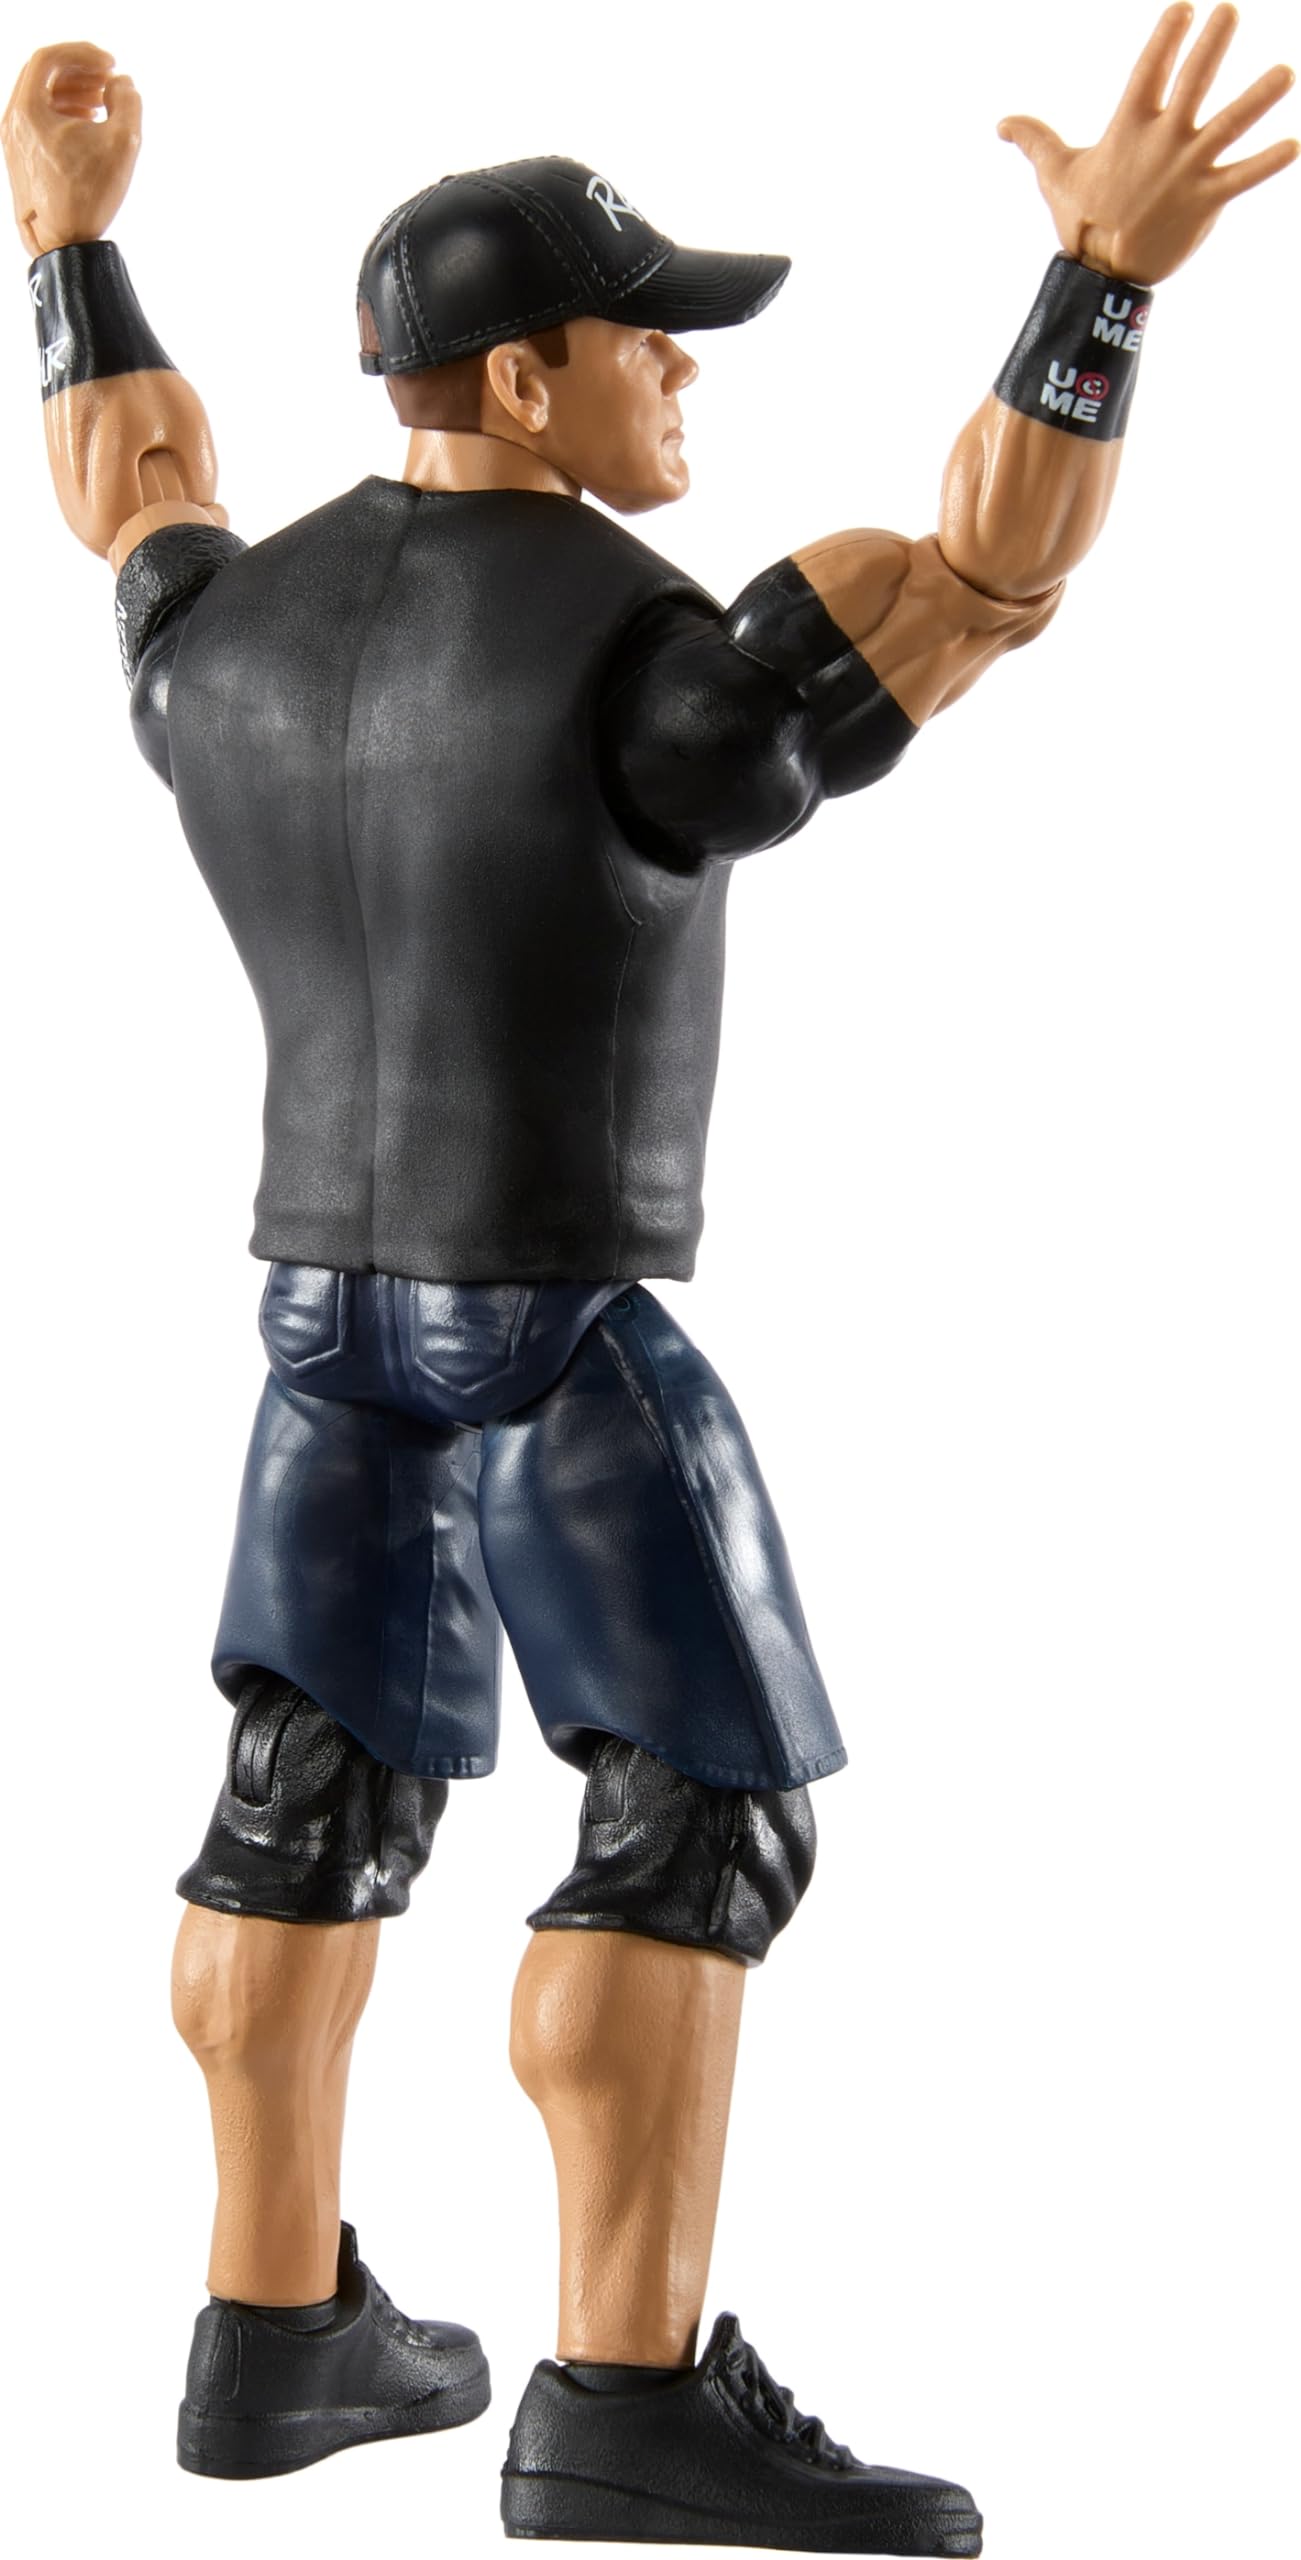 ​WWE Action Figure, 6-inch Collectible John Cena with 10 Articulation Points & Life-Like Look ​